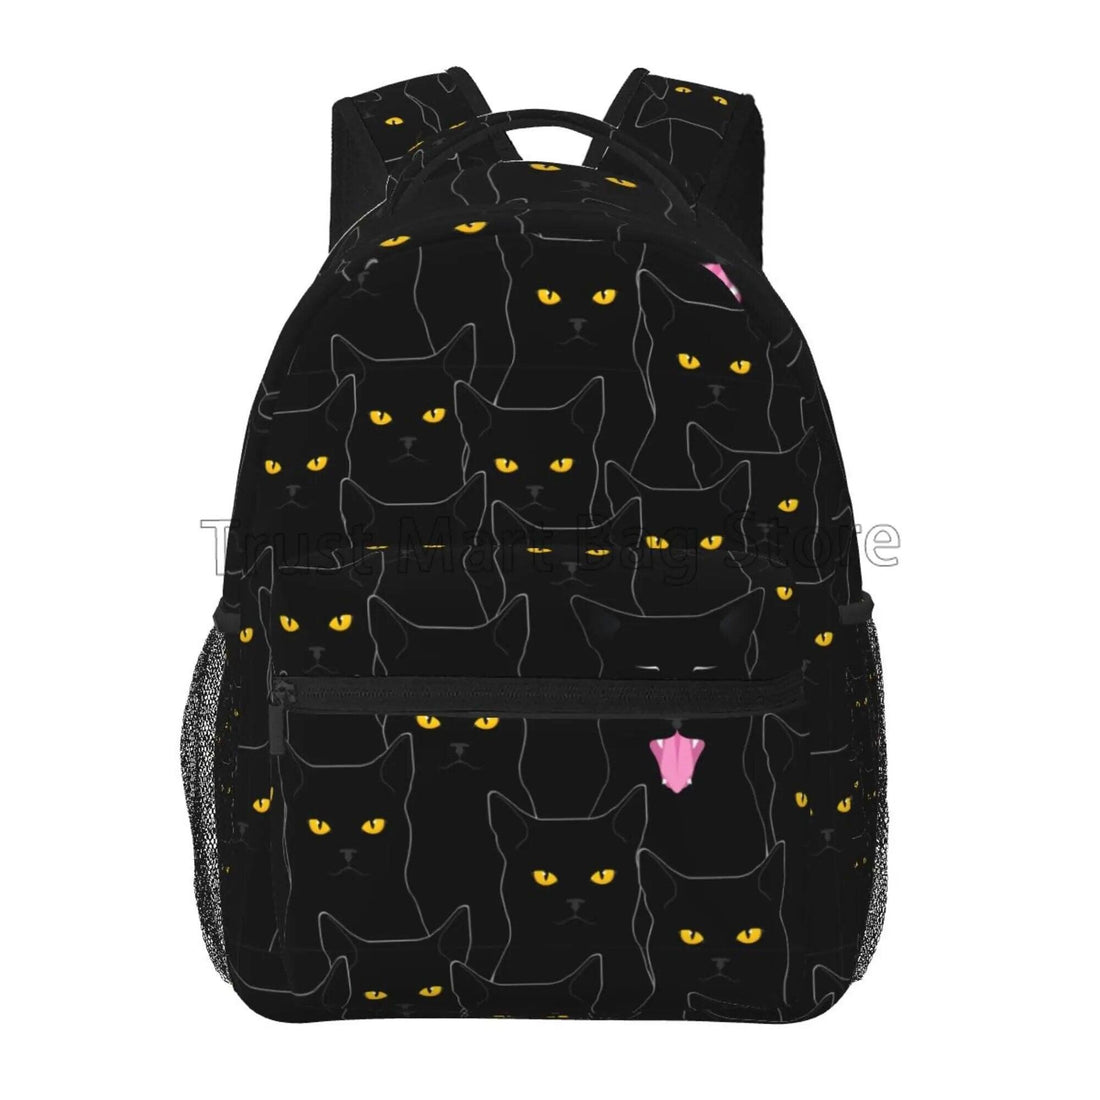 Cute Colorful Cartoon cat prints backpack, 2 Designs - Just Cats - Gifts for Cat Lovers